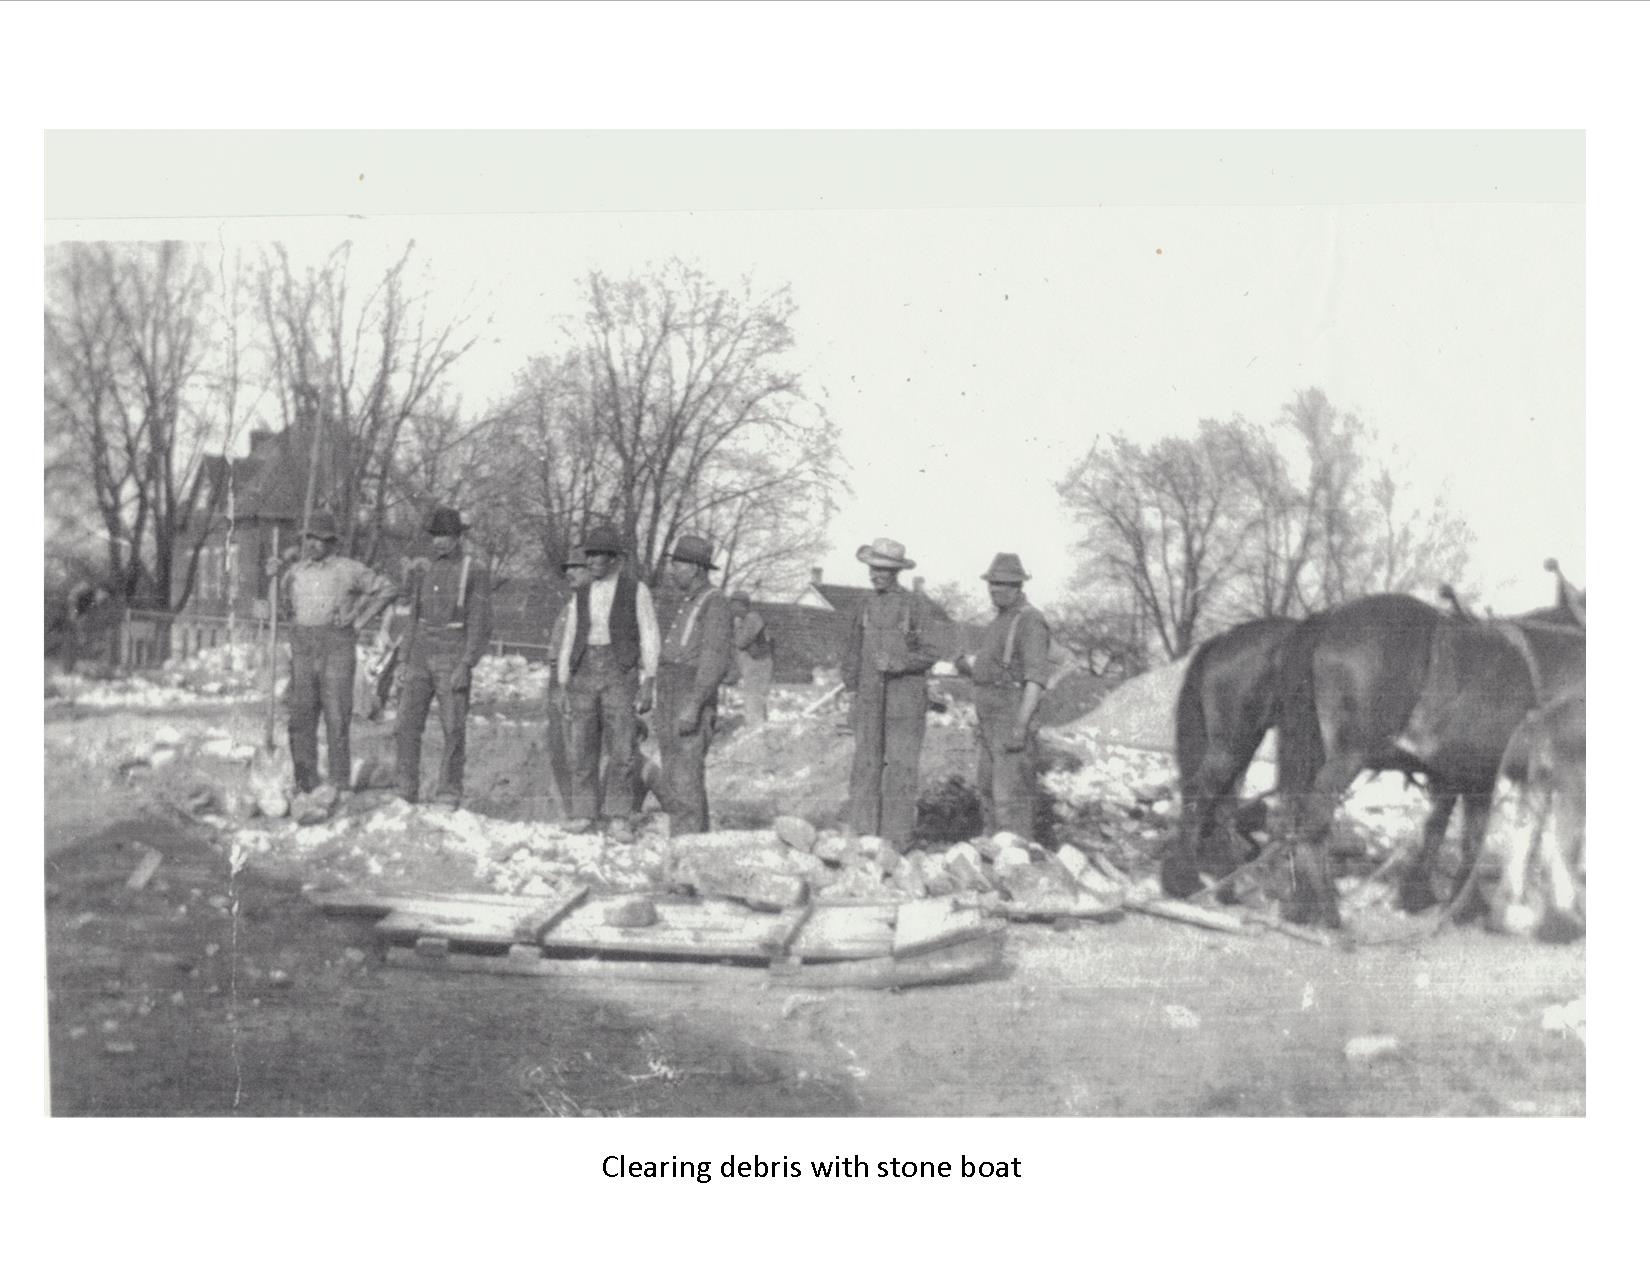 7 men standing in pile of rubble with team of horses hooked to a sliding platform called a 'stone boat'